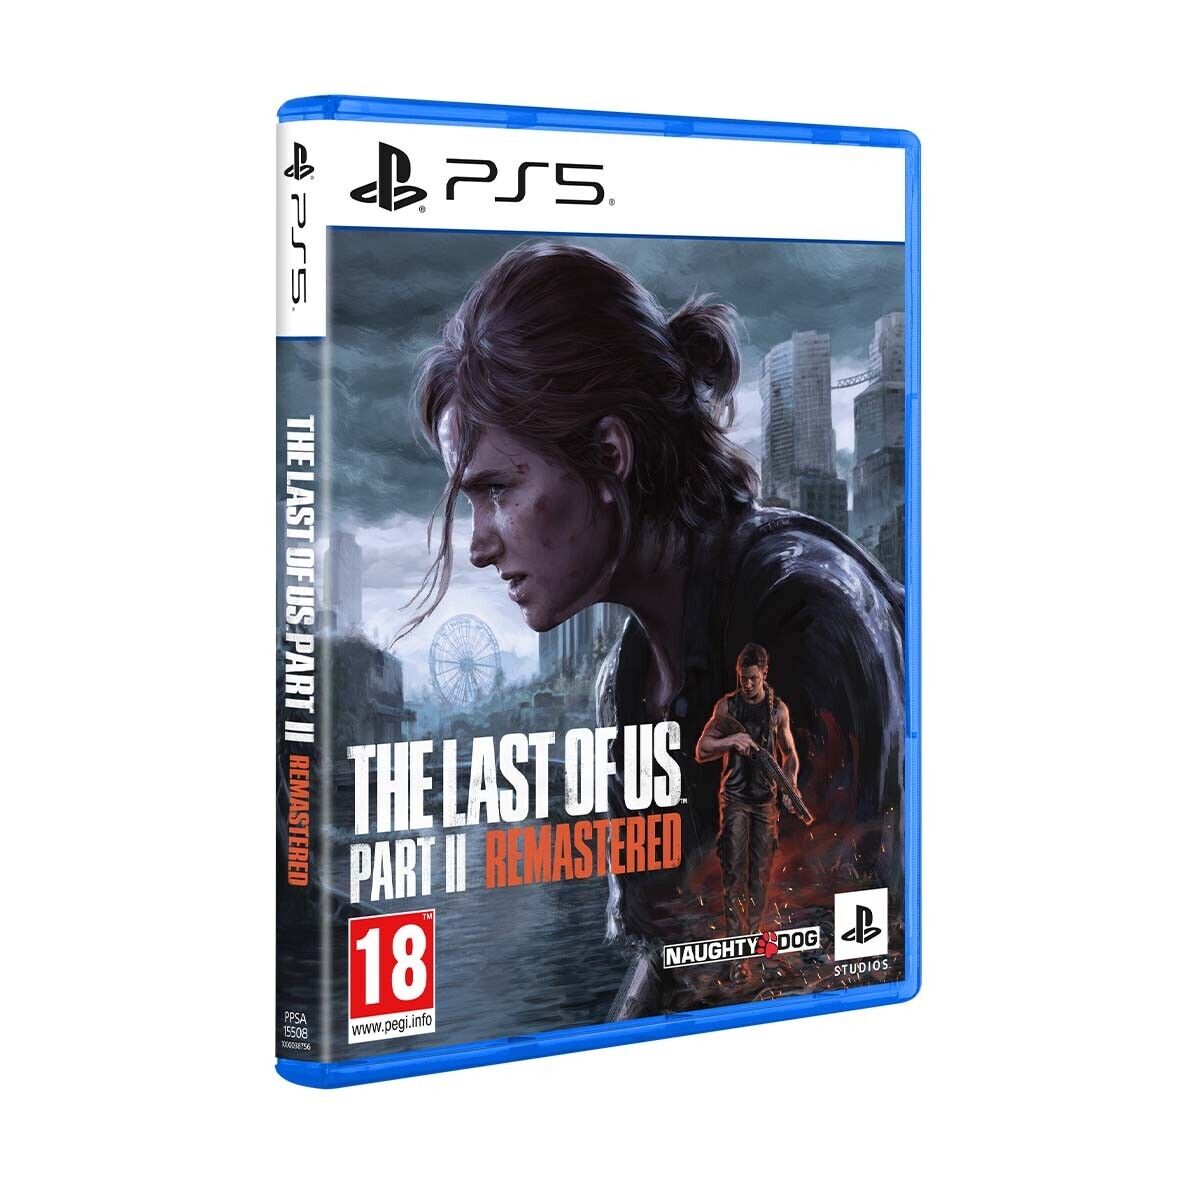 The Last of Us Part II Remastered ps5